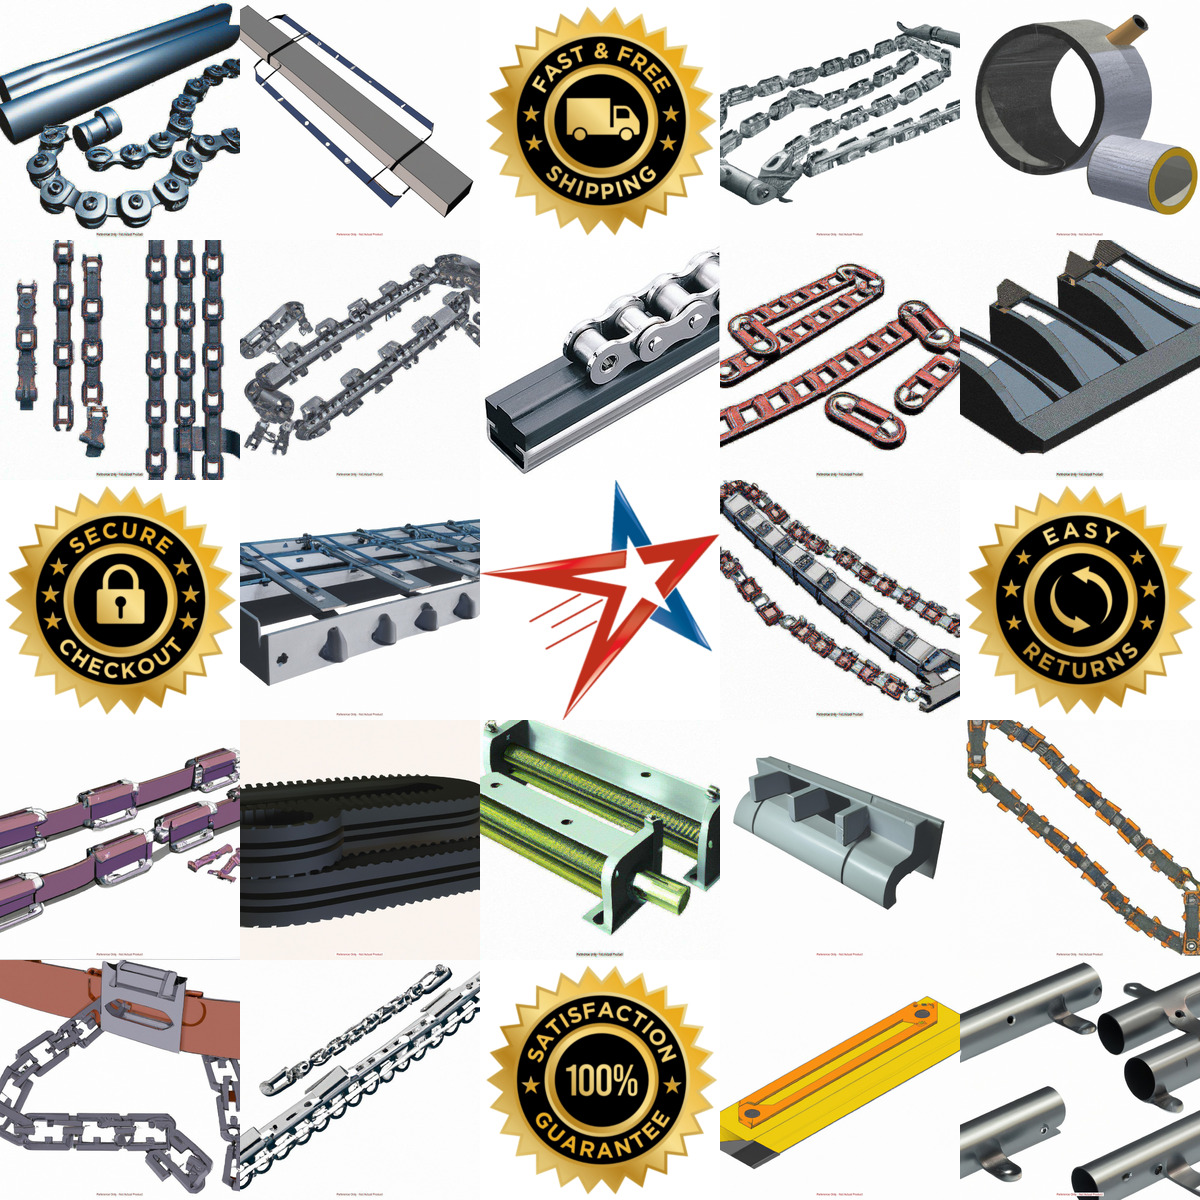 A selection of Tensioners and Tighteners products on GoVets